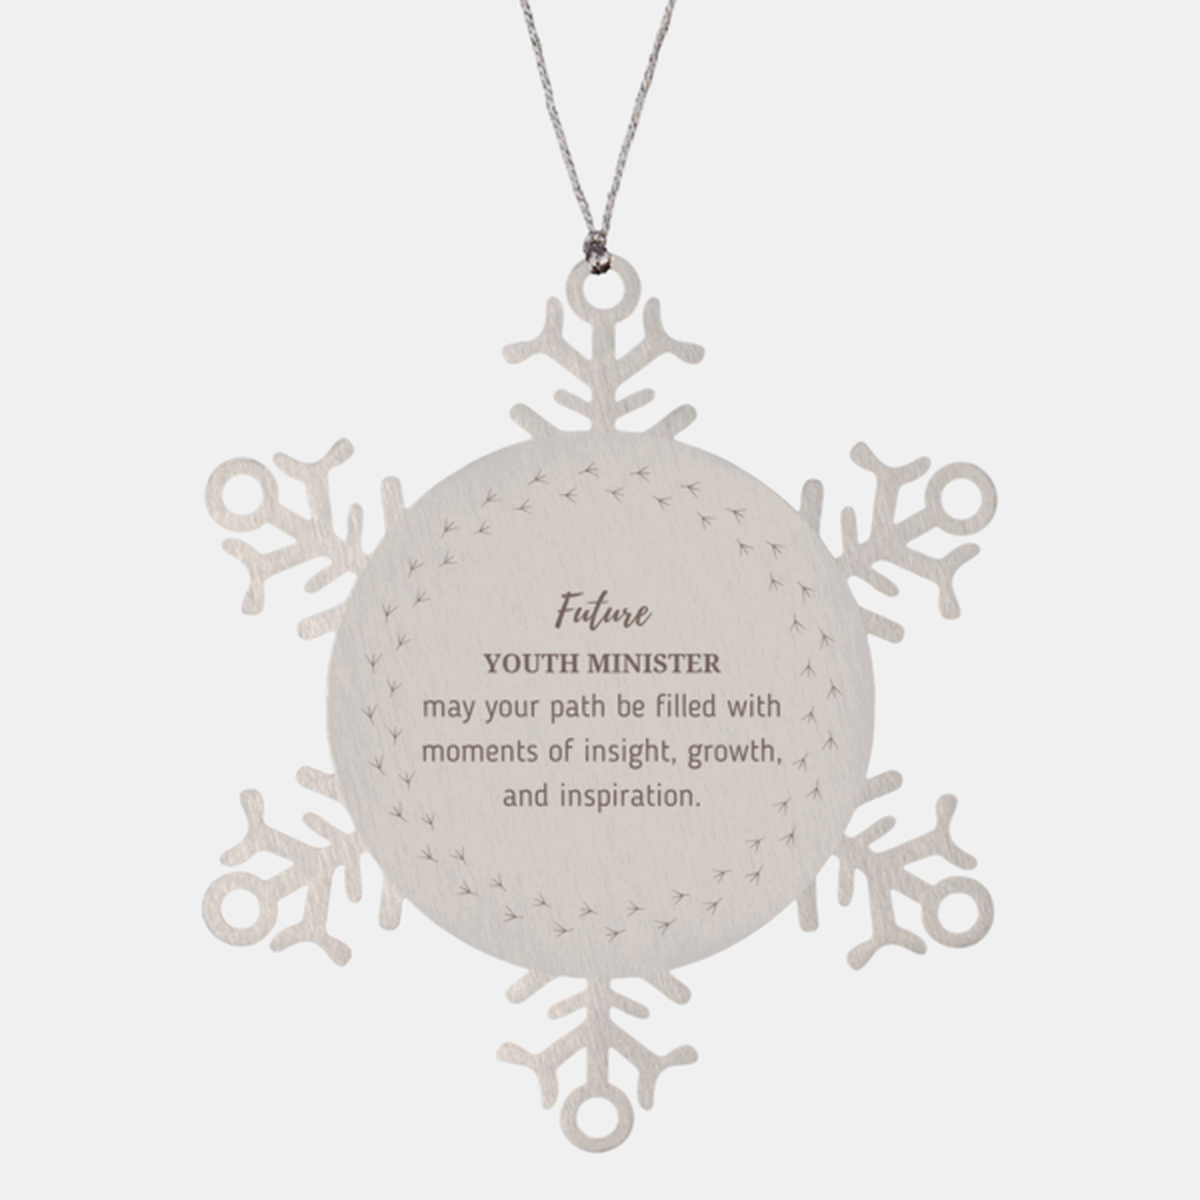 Future Youth Minister Gifts, May your path be filled with moments of insight, Graduation Gifts for New Youth Minister, Christmas Unique Snowflake Ornament For Men, Women, Friends